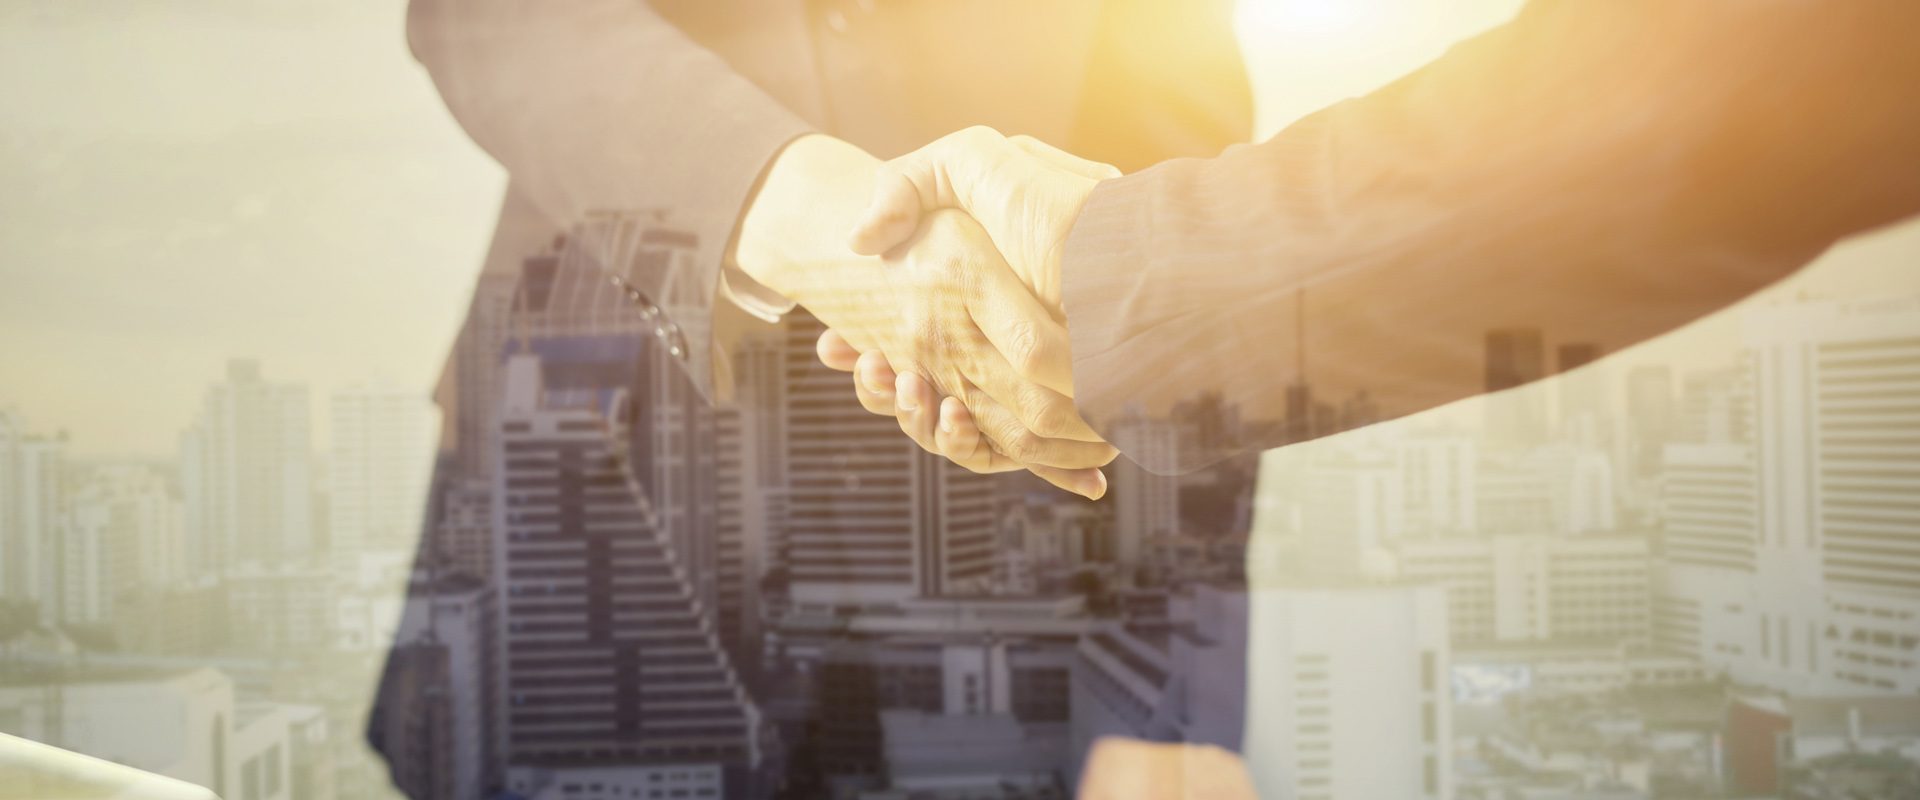 Double exposure of Great job,Sealing a deal,Successful business,Handshake,Businessman join together,Good agreement.two people shaking hands standing at the working place in city scape